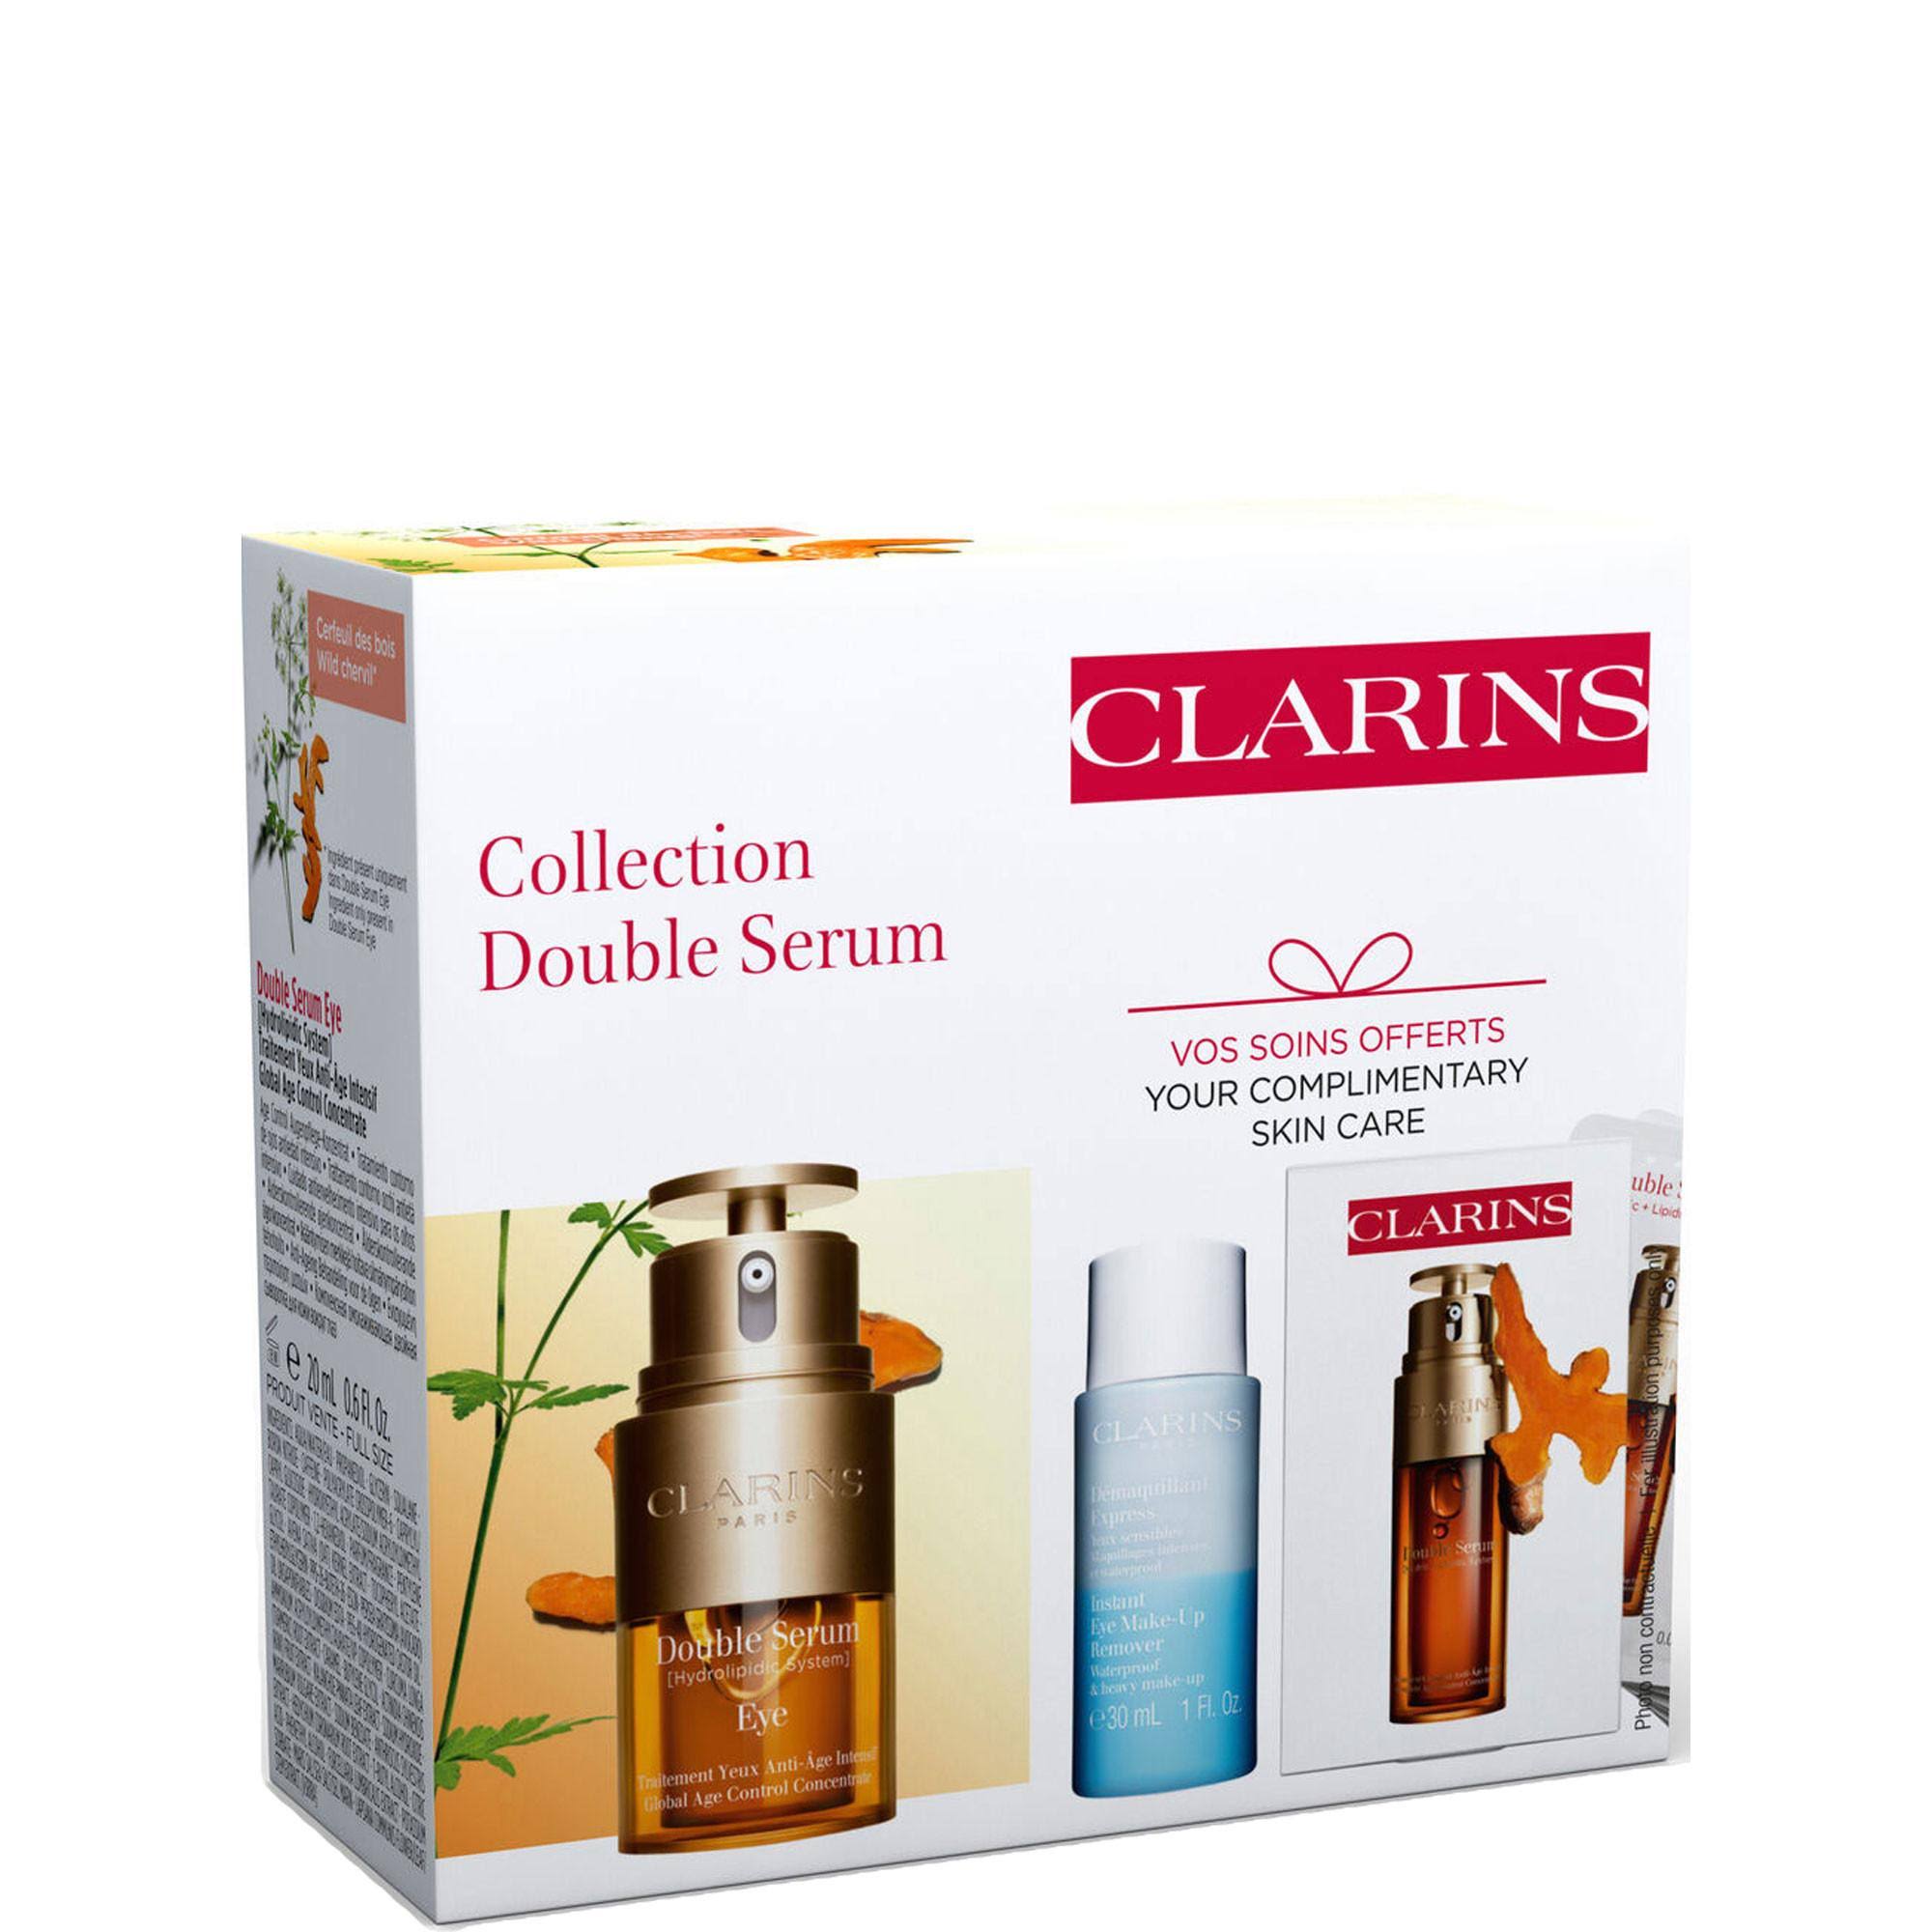 Clarins Collection Double Serum Set: Double Serum Eye 20ml & Instant Eye Make Up Remover 30ml & Double Serum 0.9mL 3pcs